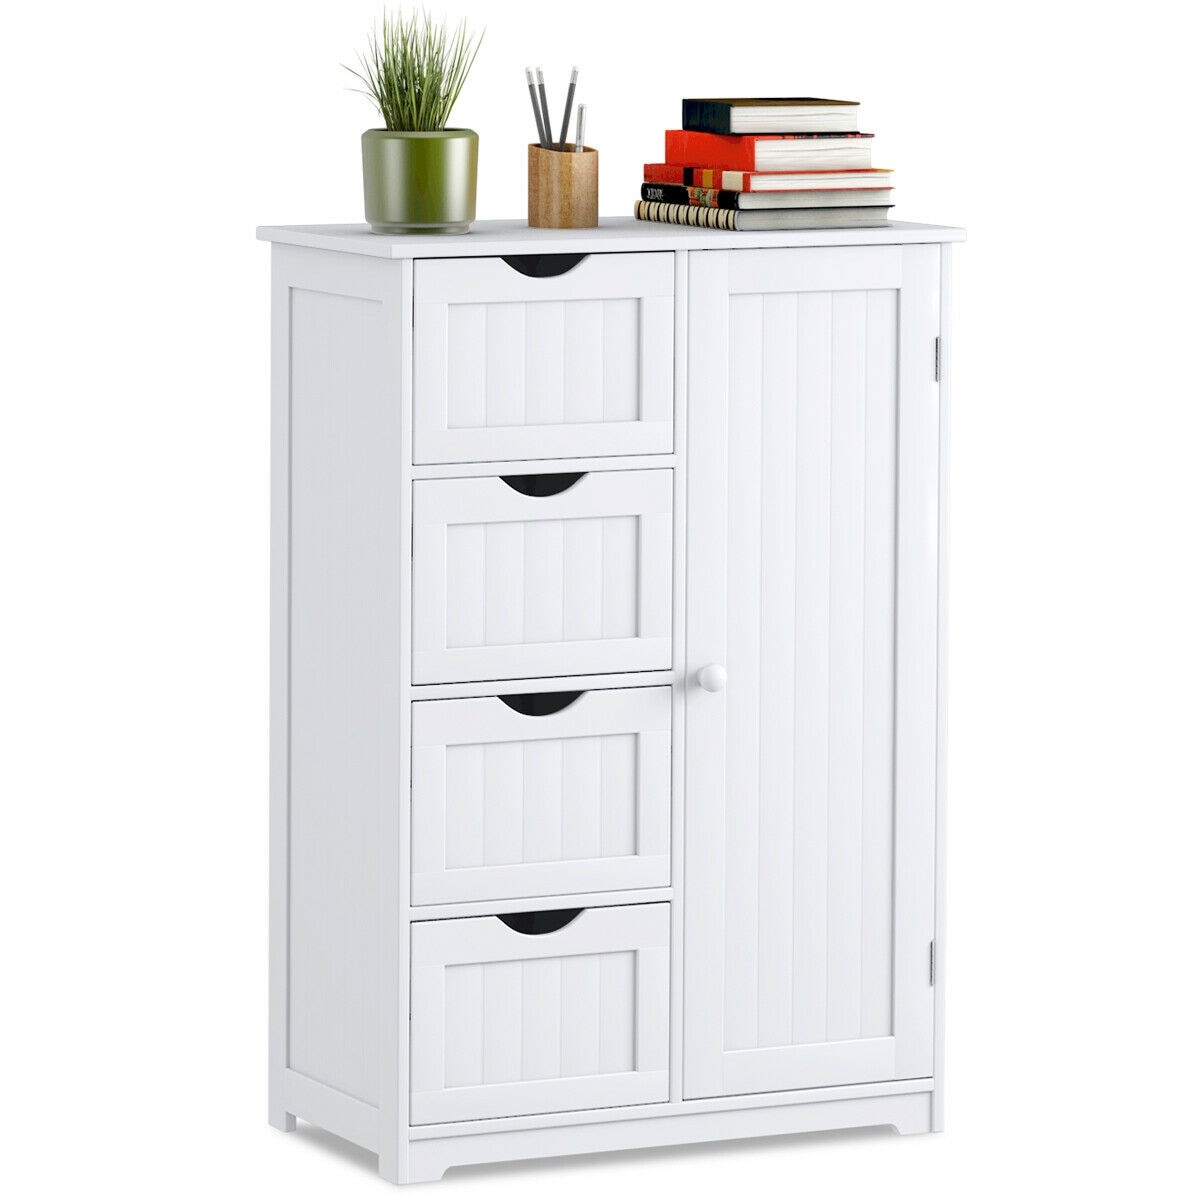 https://ak1.ostkcdn.com/images/products/is/images/direct/ea6bb20674e80541a4d0a69a1b944c8aa8807405/Costway-Wooden-4-Drawer-Bathroom-Cabinet-Storage-Cupboard-2-Shelves.jpg